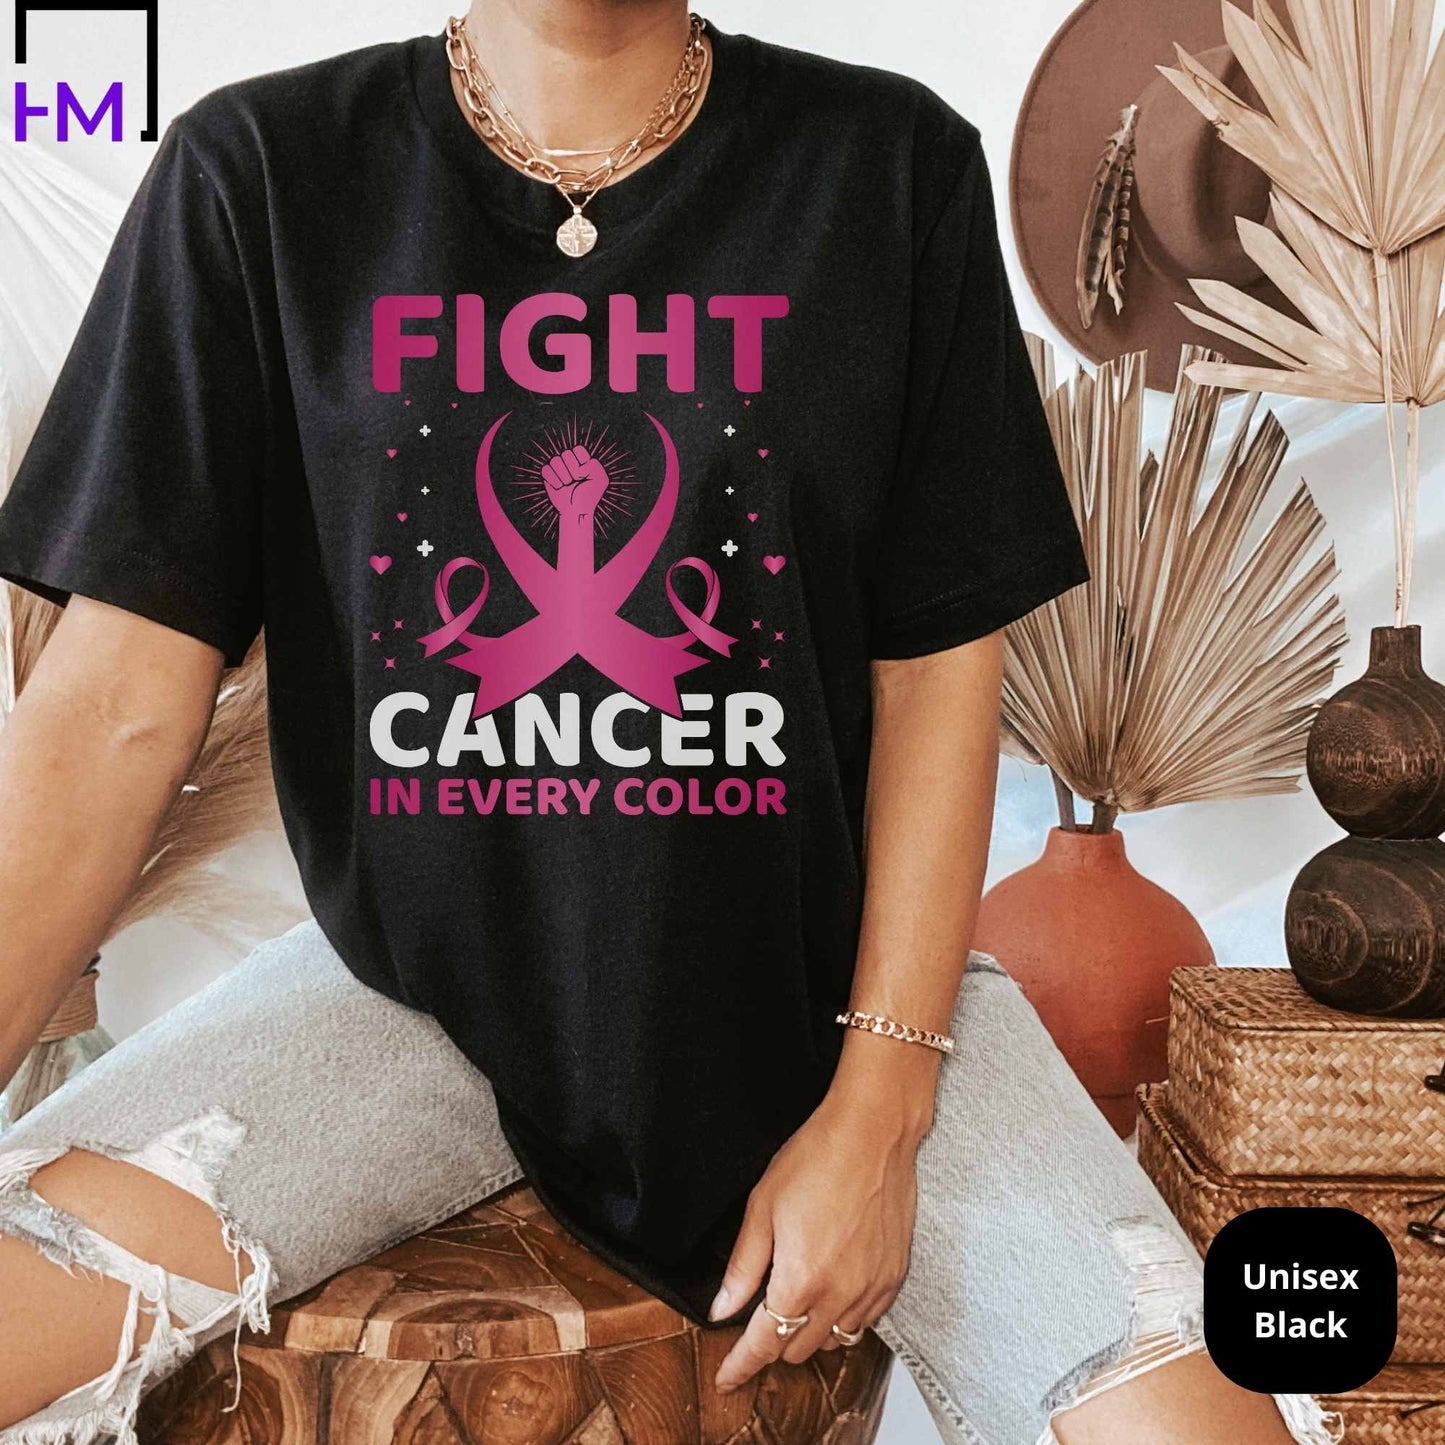 Fight Cancer in Every Color, World Cancer Day Shirt, Breast Cancer Shirt, Never Give Up, Cancer Survivor Gifts, Stronger than Cancer Sweatshirt, Pink Ribbon Hoodie HMDesignStudioUS